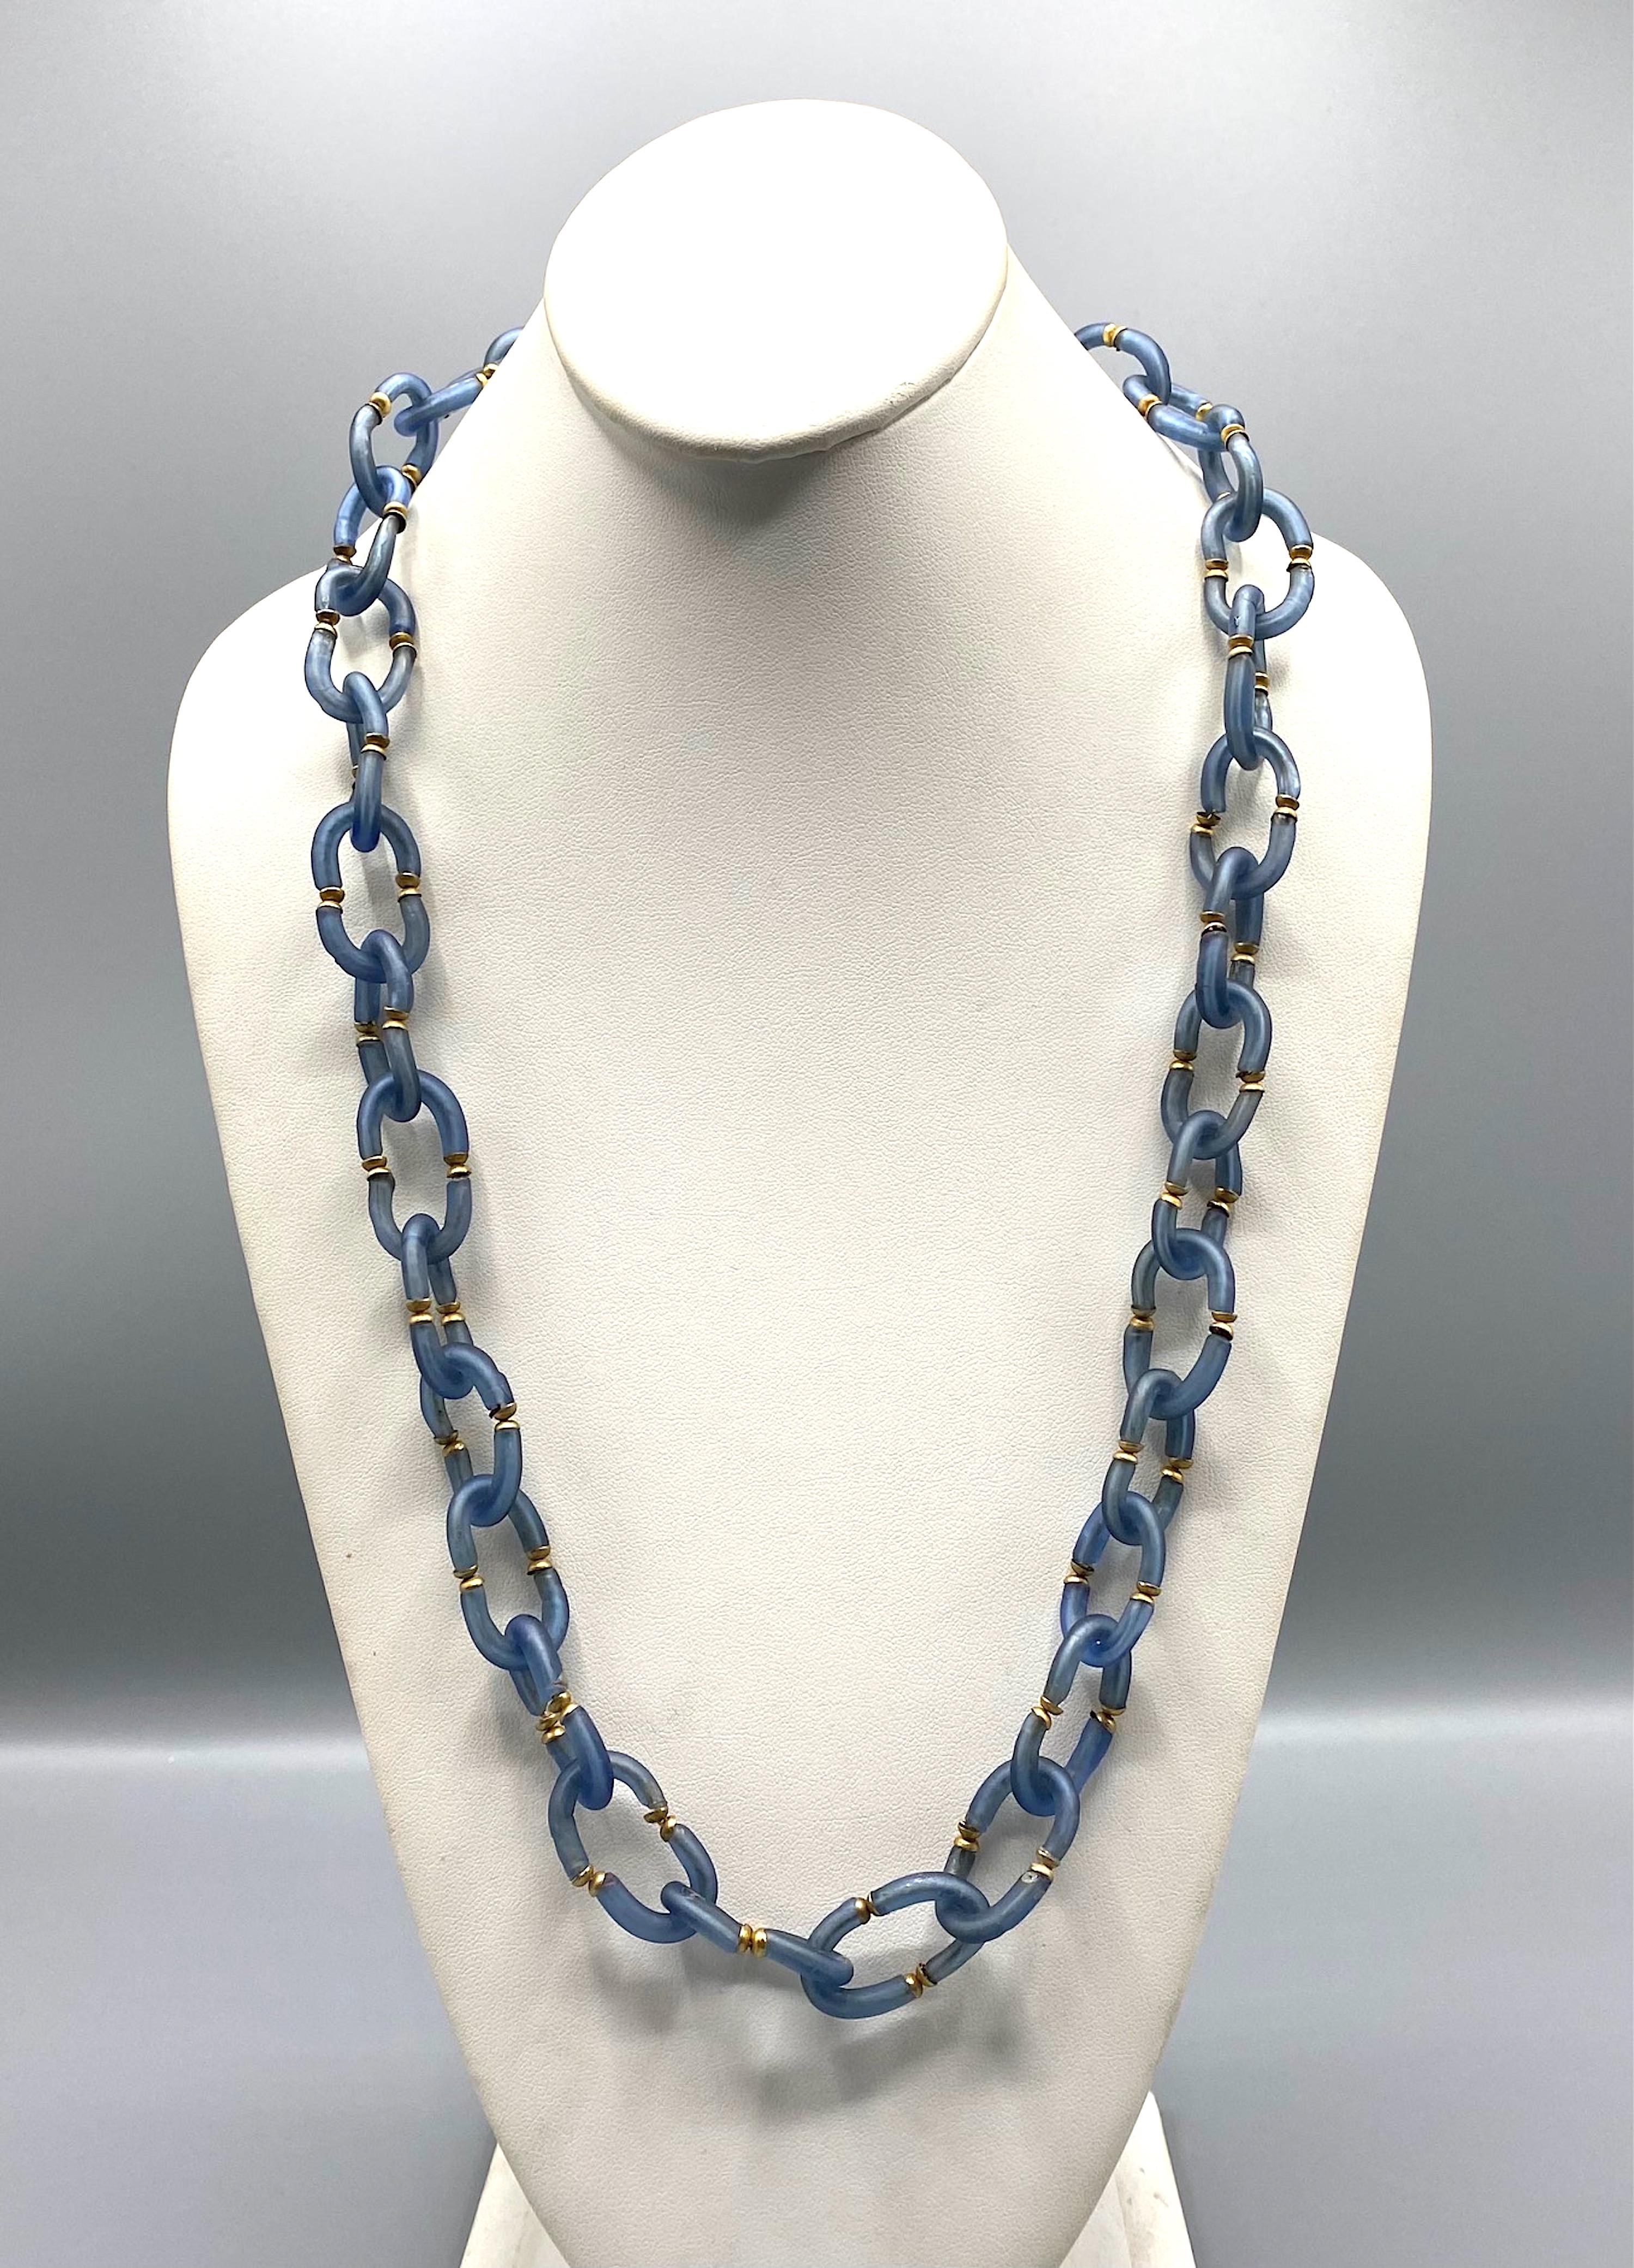 Lovely glass chain necklace by Archimede Seguso of Italy. Chain links are hand formed of two C shape glass pieces. The necklace is 29 inches long and .75 of an inch wide.
Unusual round Clasp with beads and glass small bars
